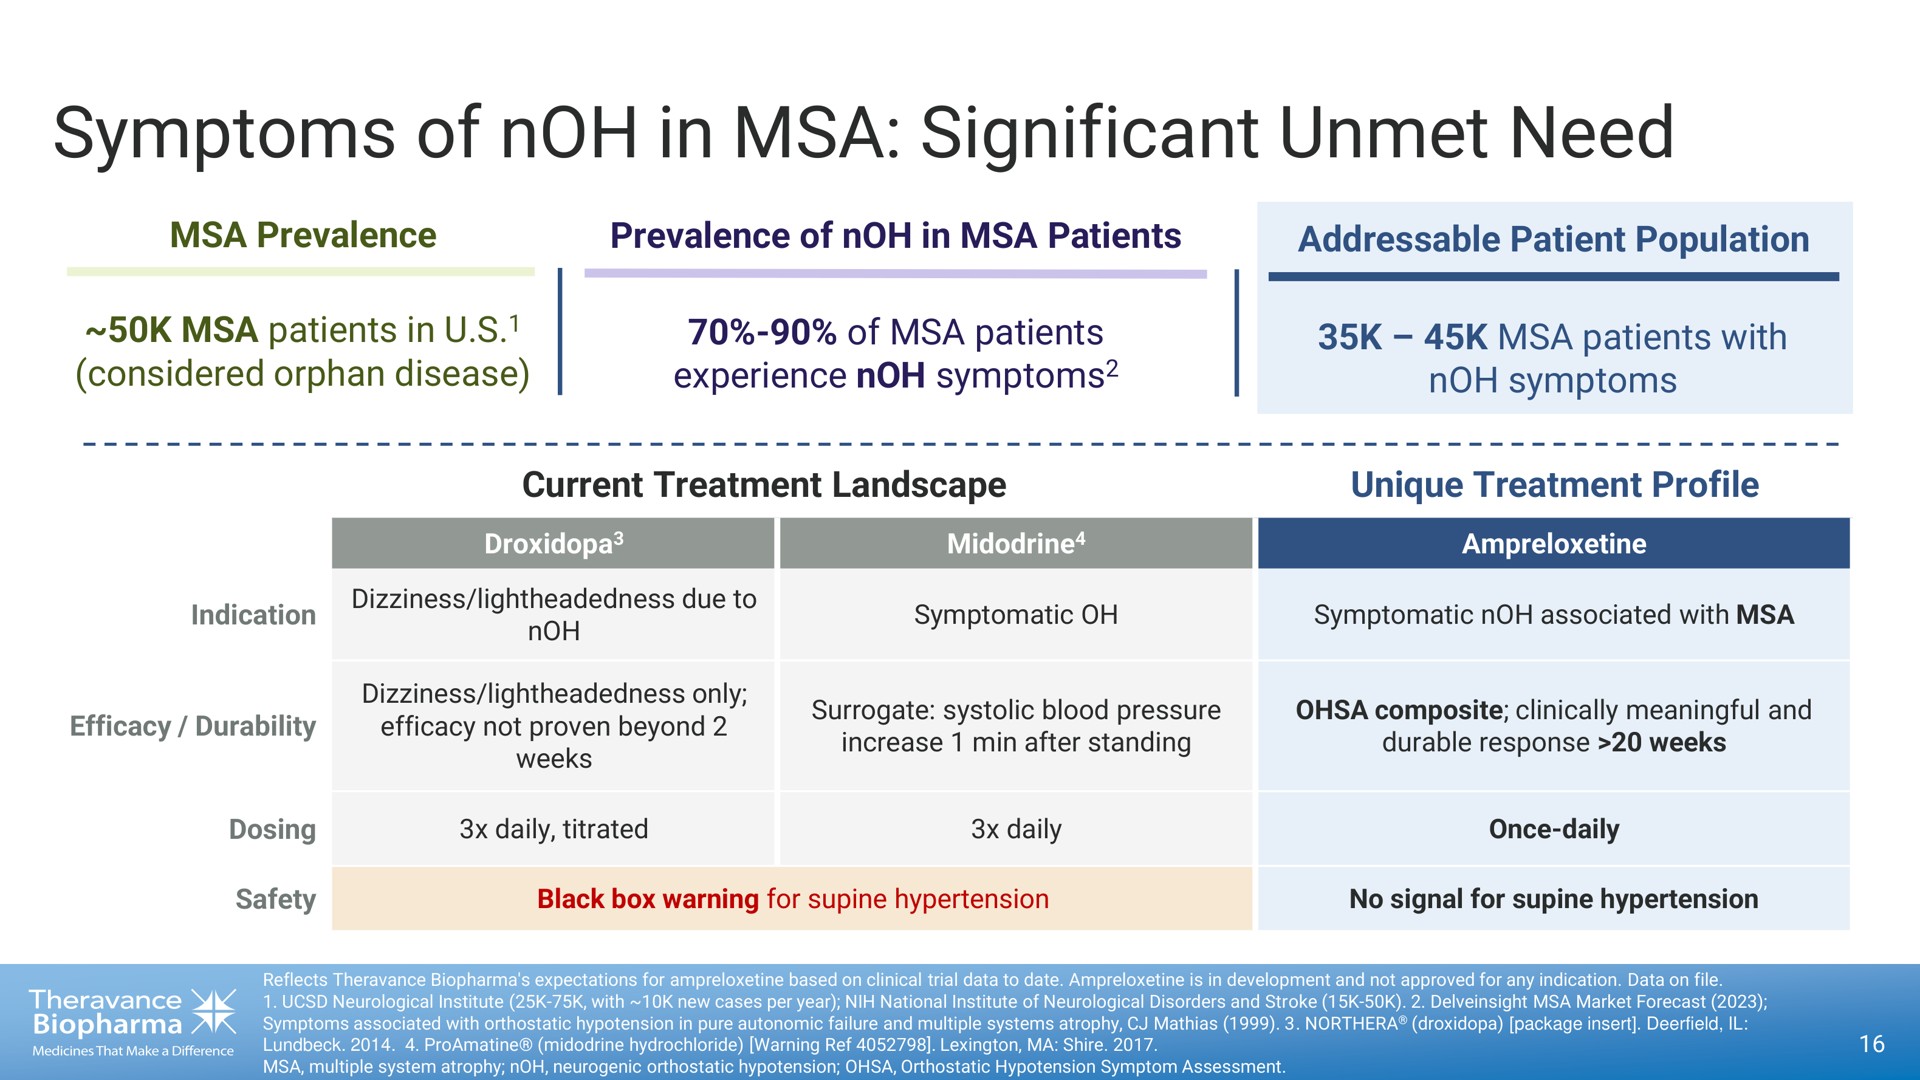 symptoms of in significant unmet need | Theravance Biopharma